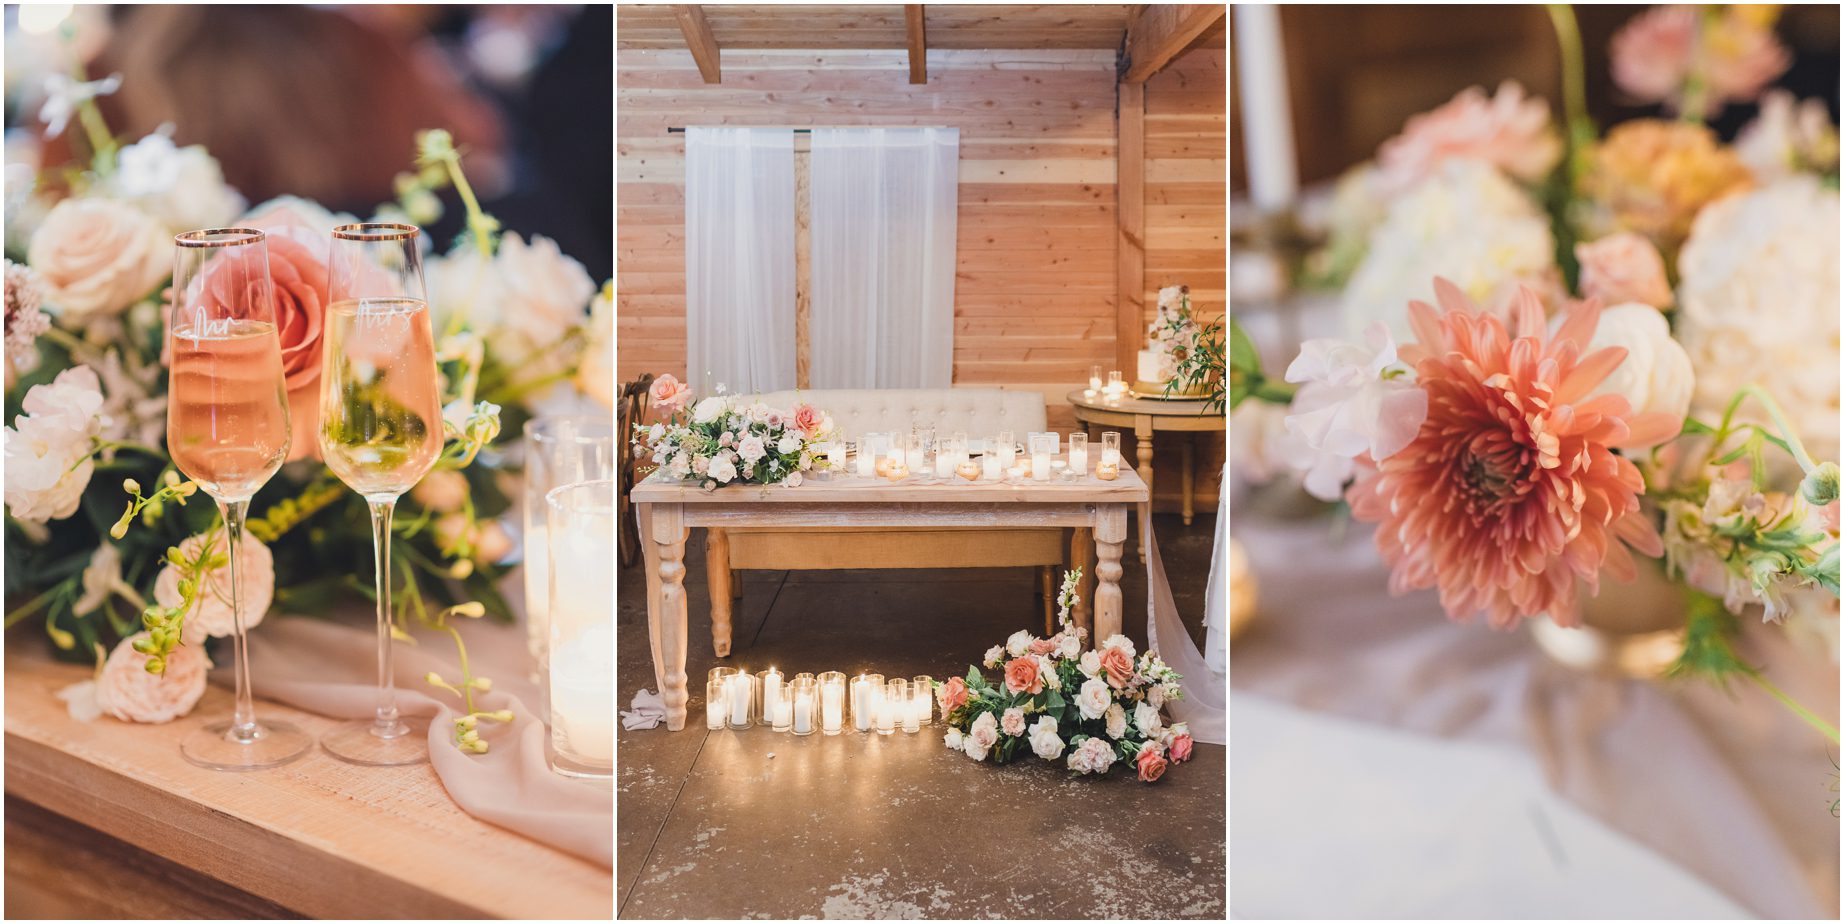 Reception details for a wedding at Serendipity Gardens weddings